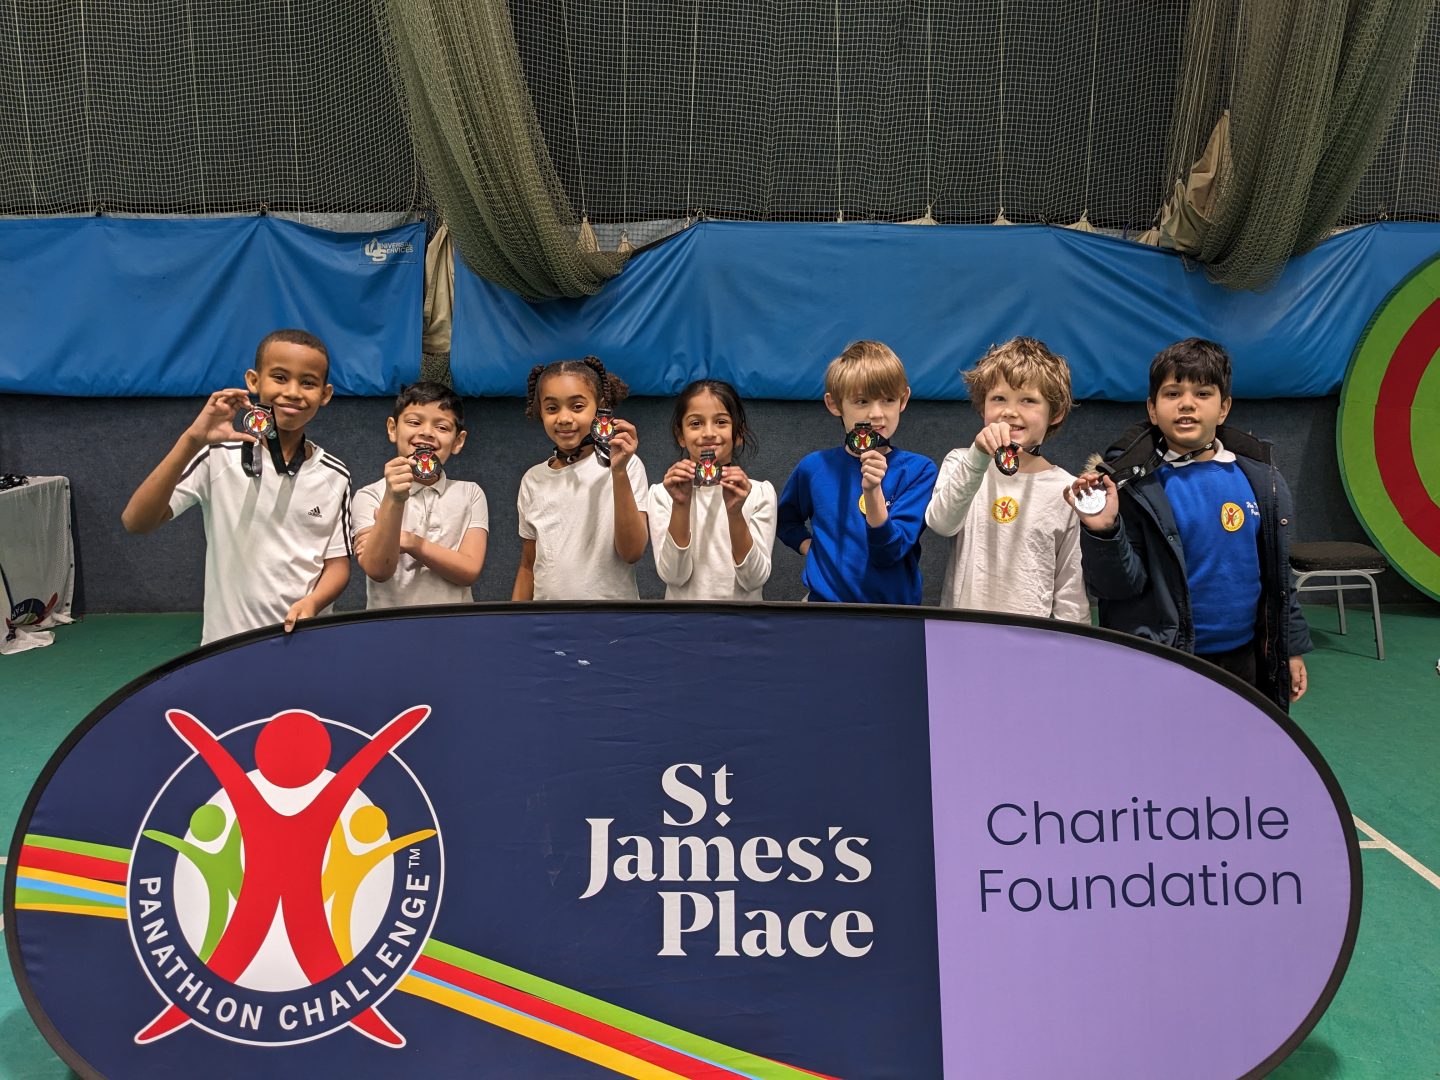 A group of children holding their medals in front of the Panathlon banner.